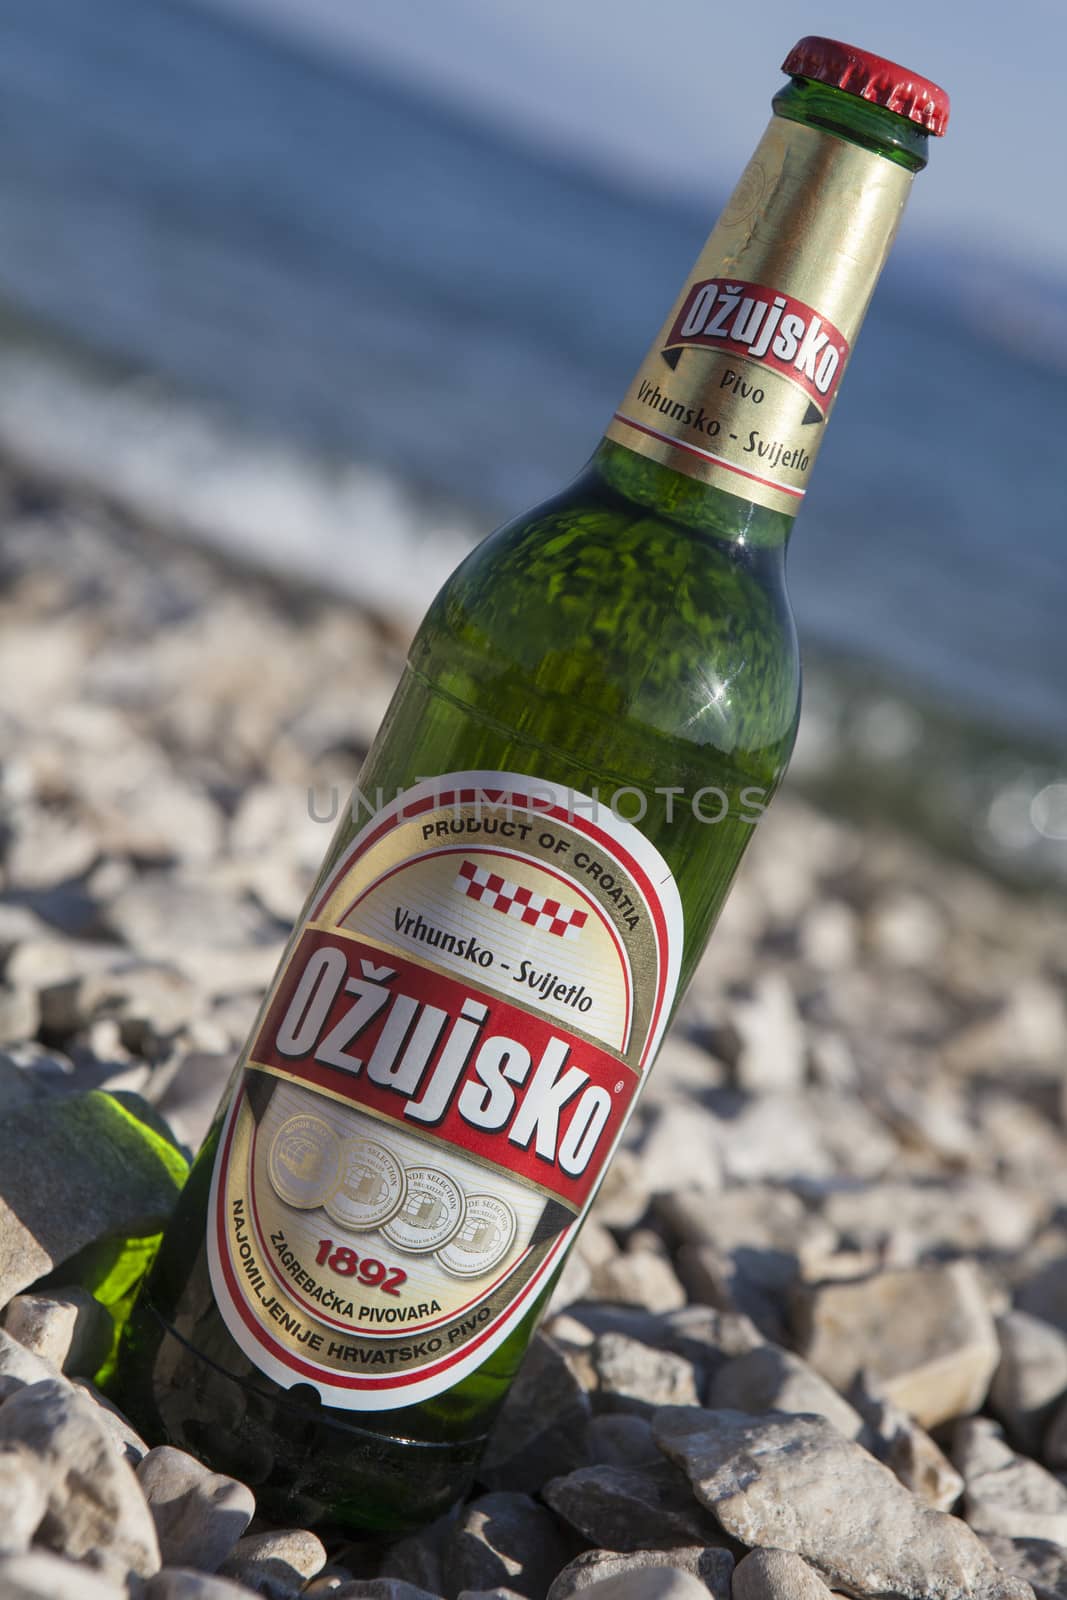 Ozujsko beer by bayberry